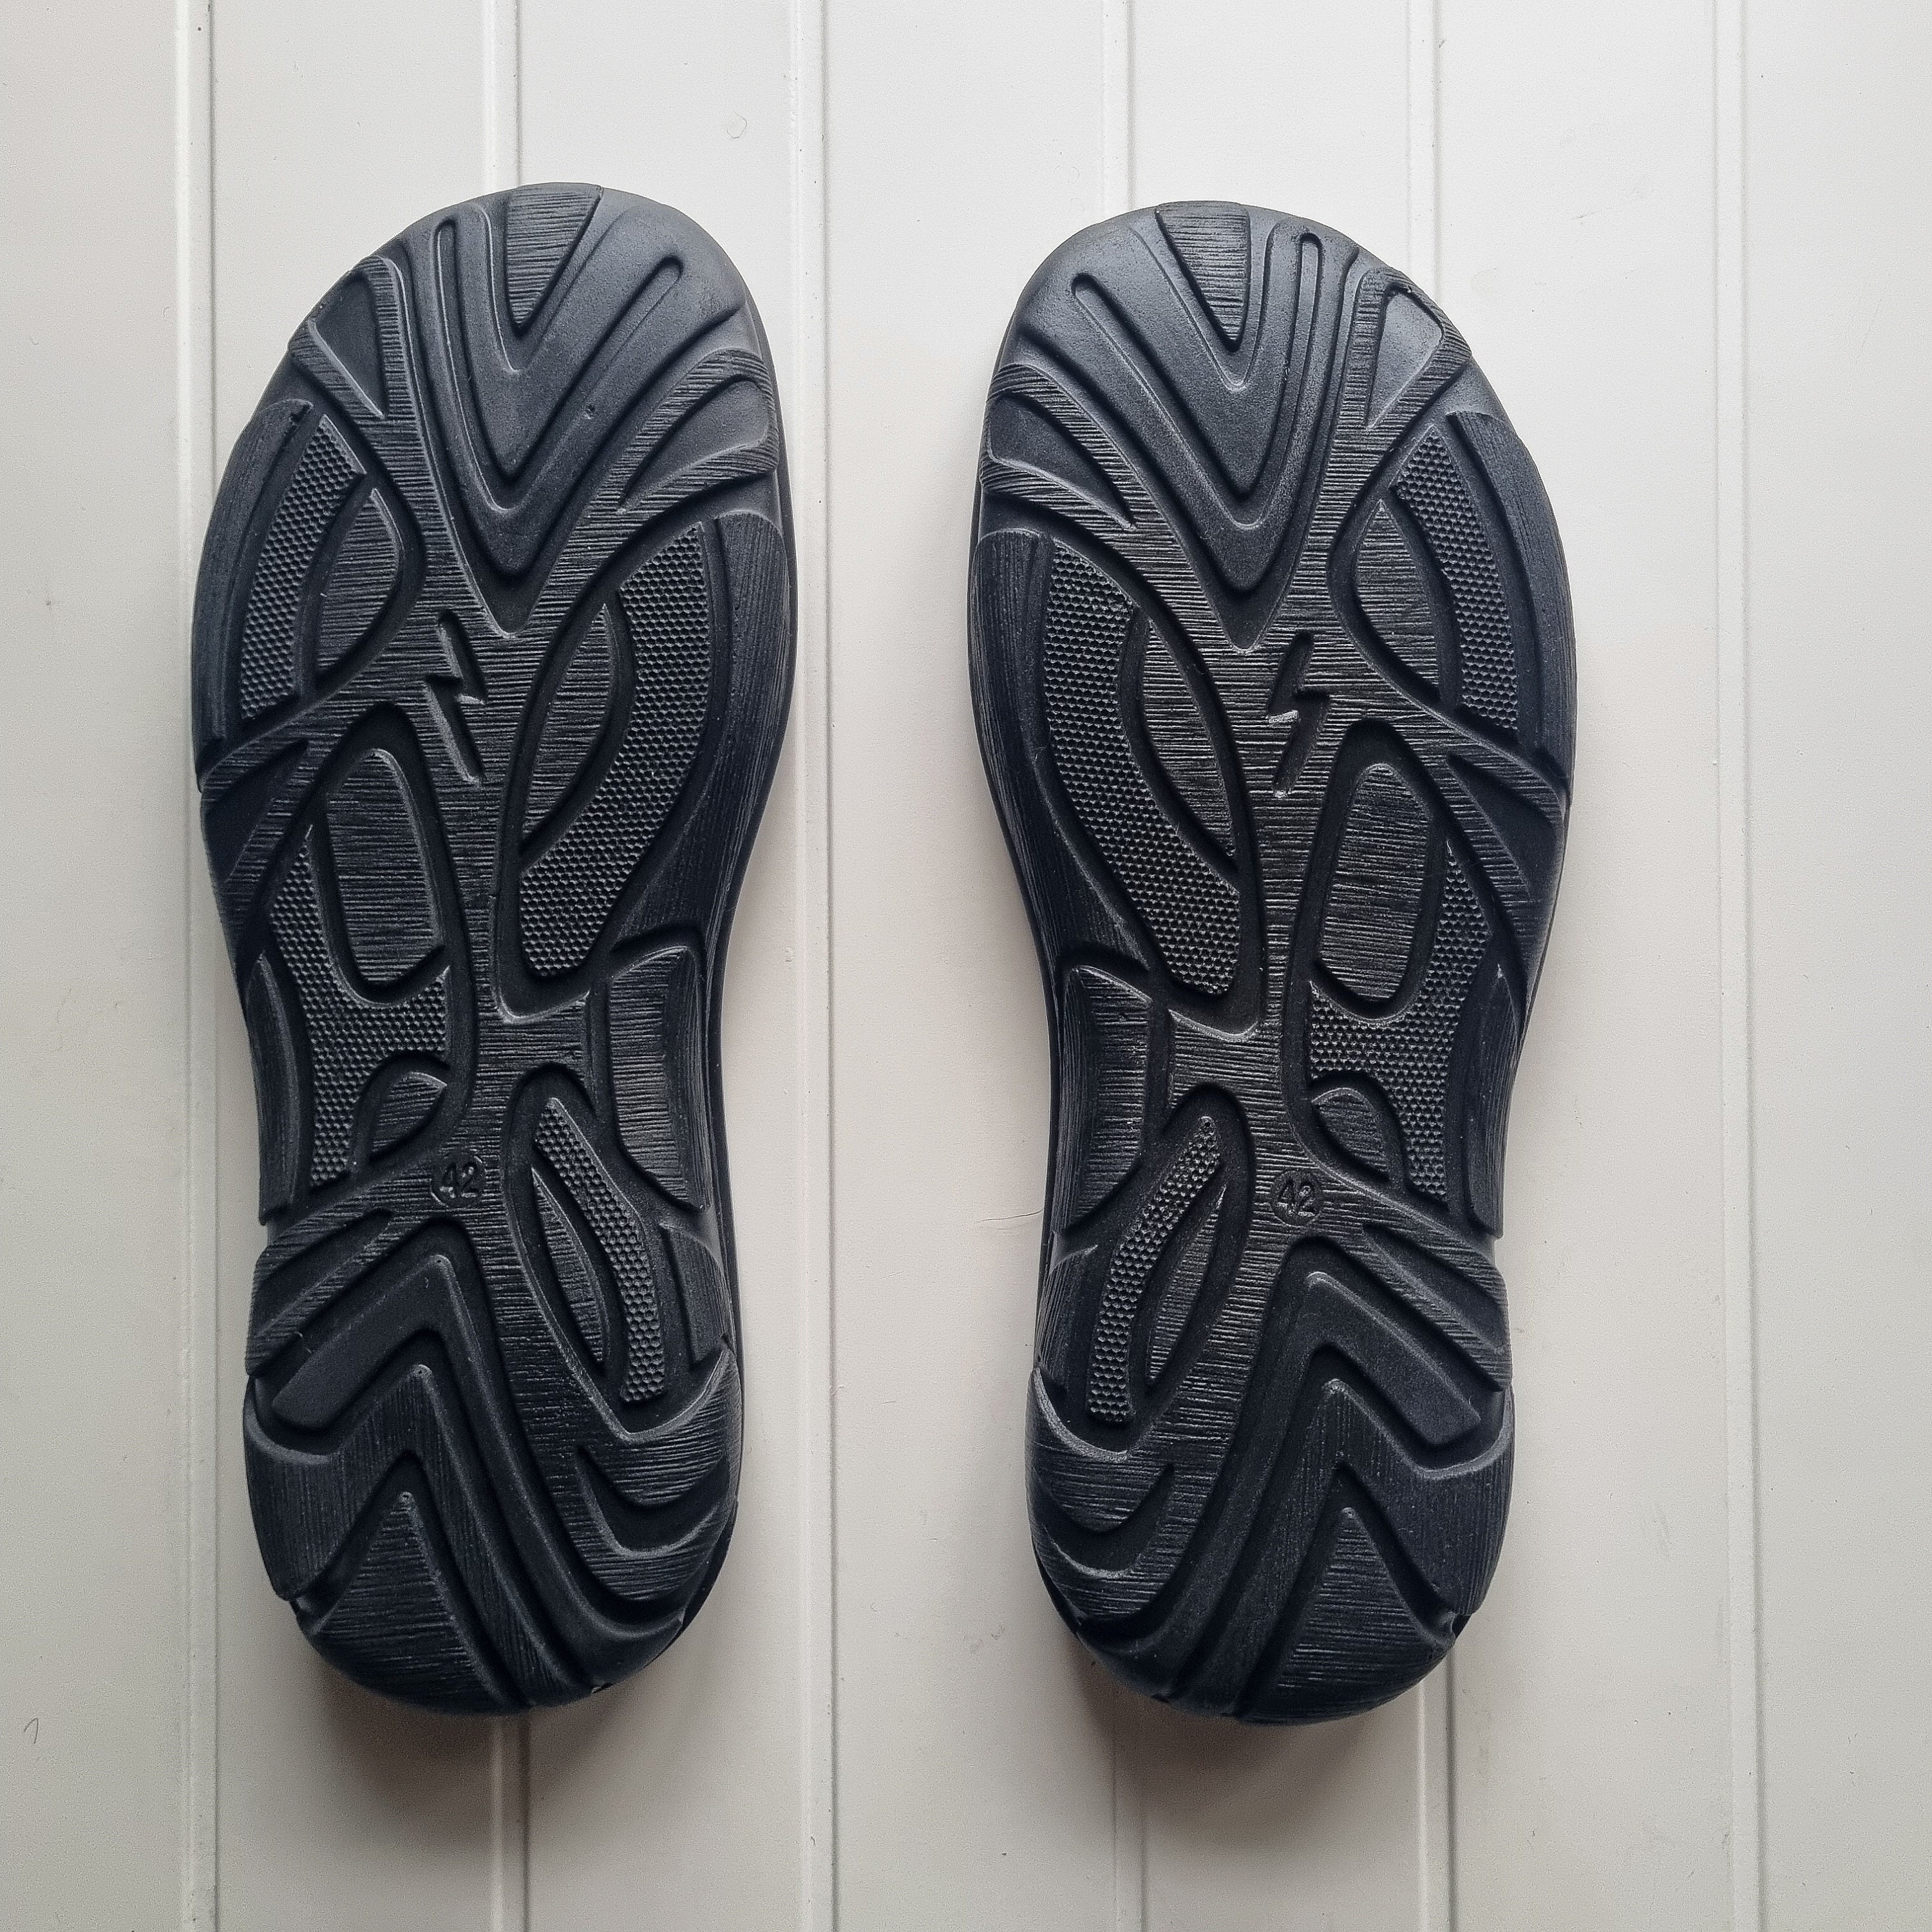 Shoe Soles.rubber TR Flexible, Shoes From Skin, Felt and Knitted. Women's Shoe  Sole. 